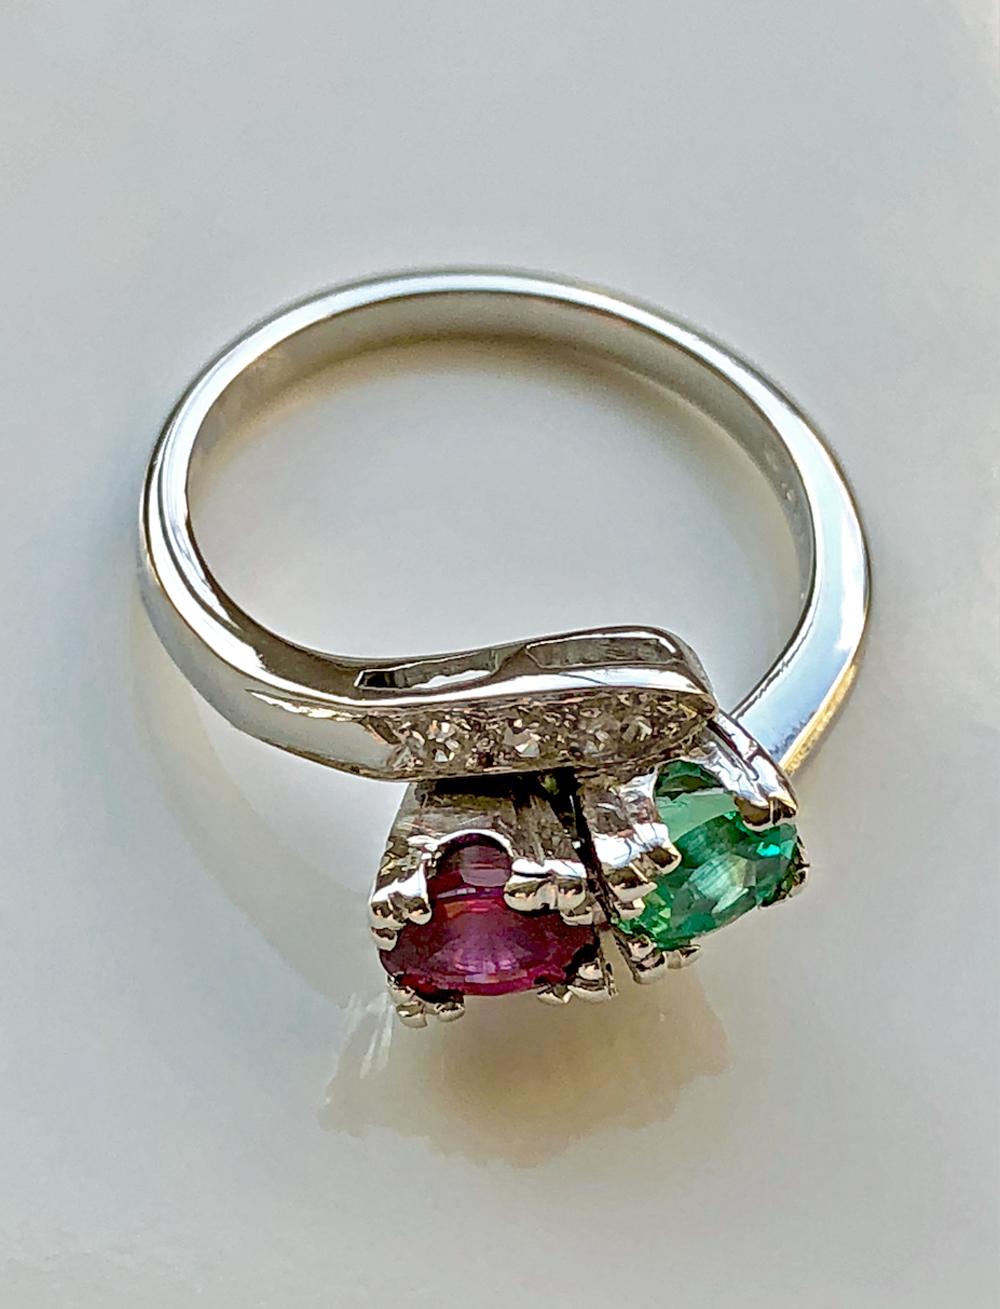 An Exclusive 1920s Antique Art Deco Emerald Ruby Diamond Platinum Engagement Ring
Primary Stone: 100% Natural Ruby, Emerald and Diamond
Shape or Cut: Oval Cut, Round Cut
Total Gemstone Weight: Approx. 1.50 Carat 
Average Color Gemstone: Best Color